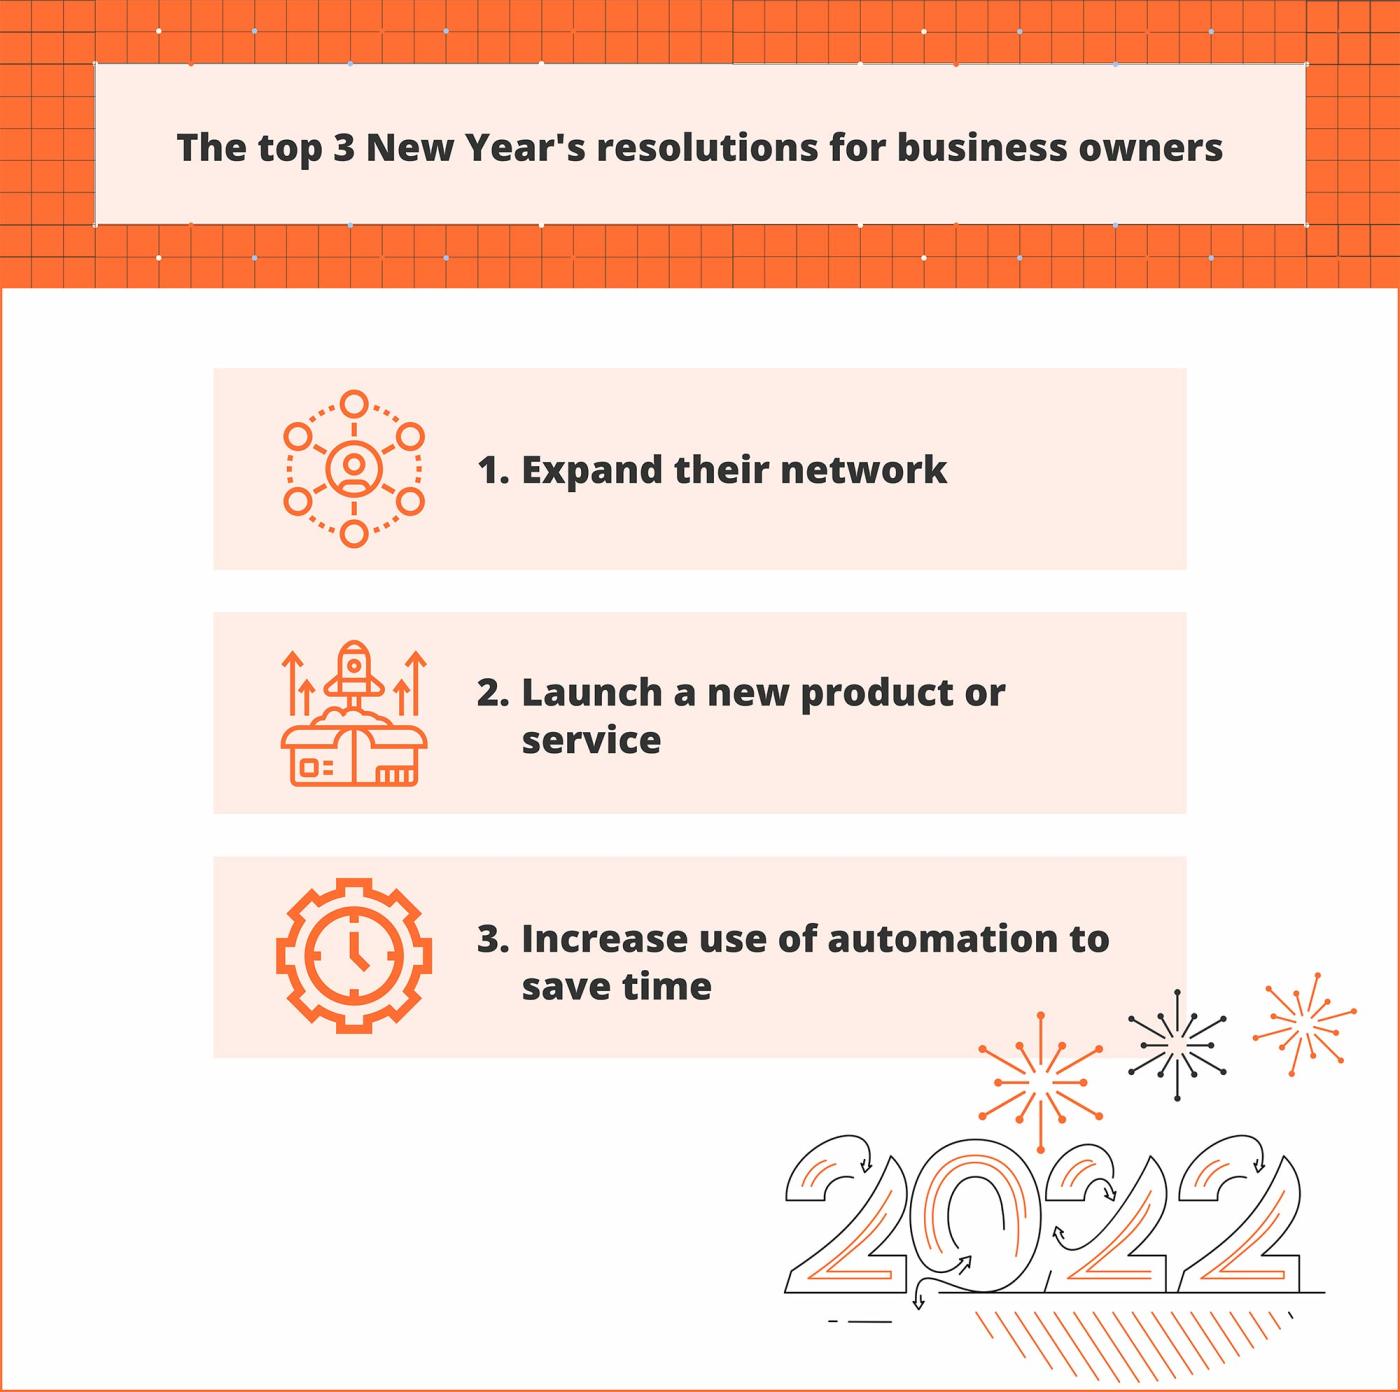 The top 3 New Year's resolutions for business owners: expand network, launch a new product/service, increase use of automation to save time